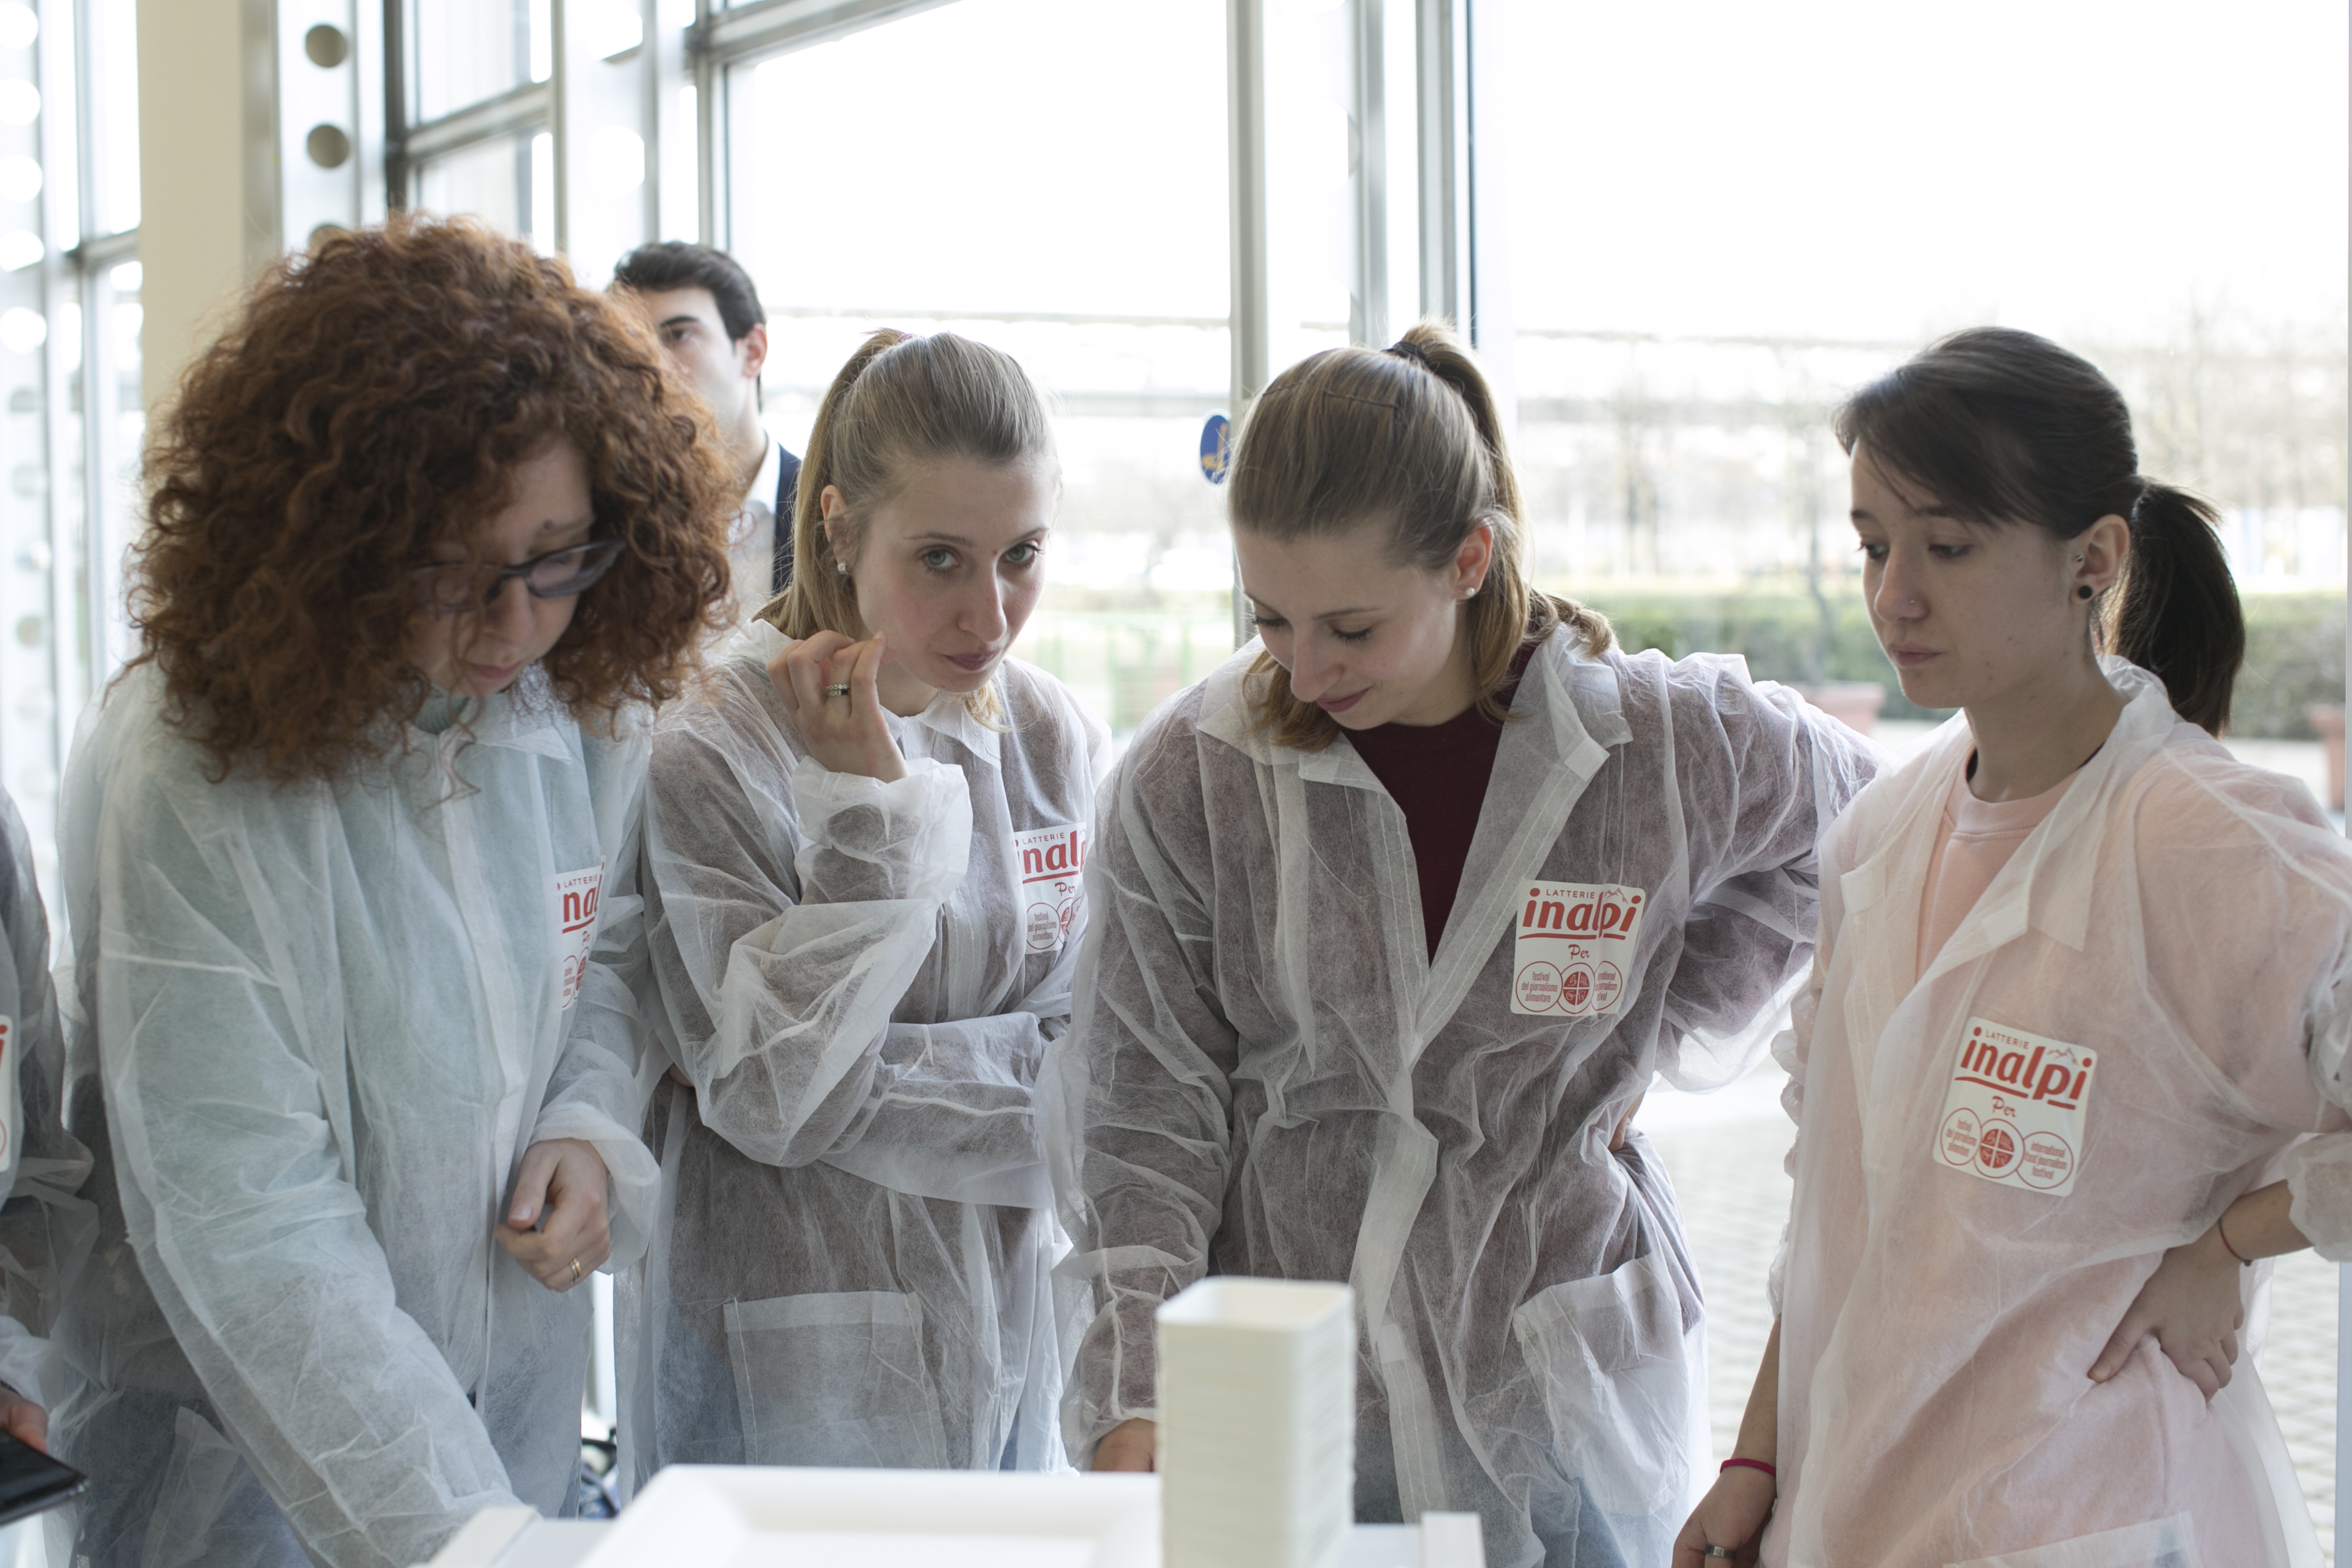 the lab coats for the festival workshops offered by Inalpi